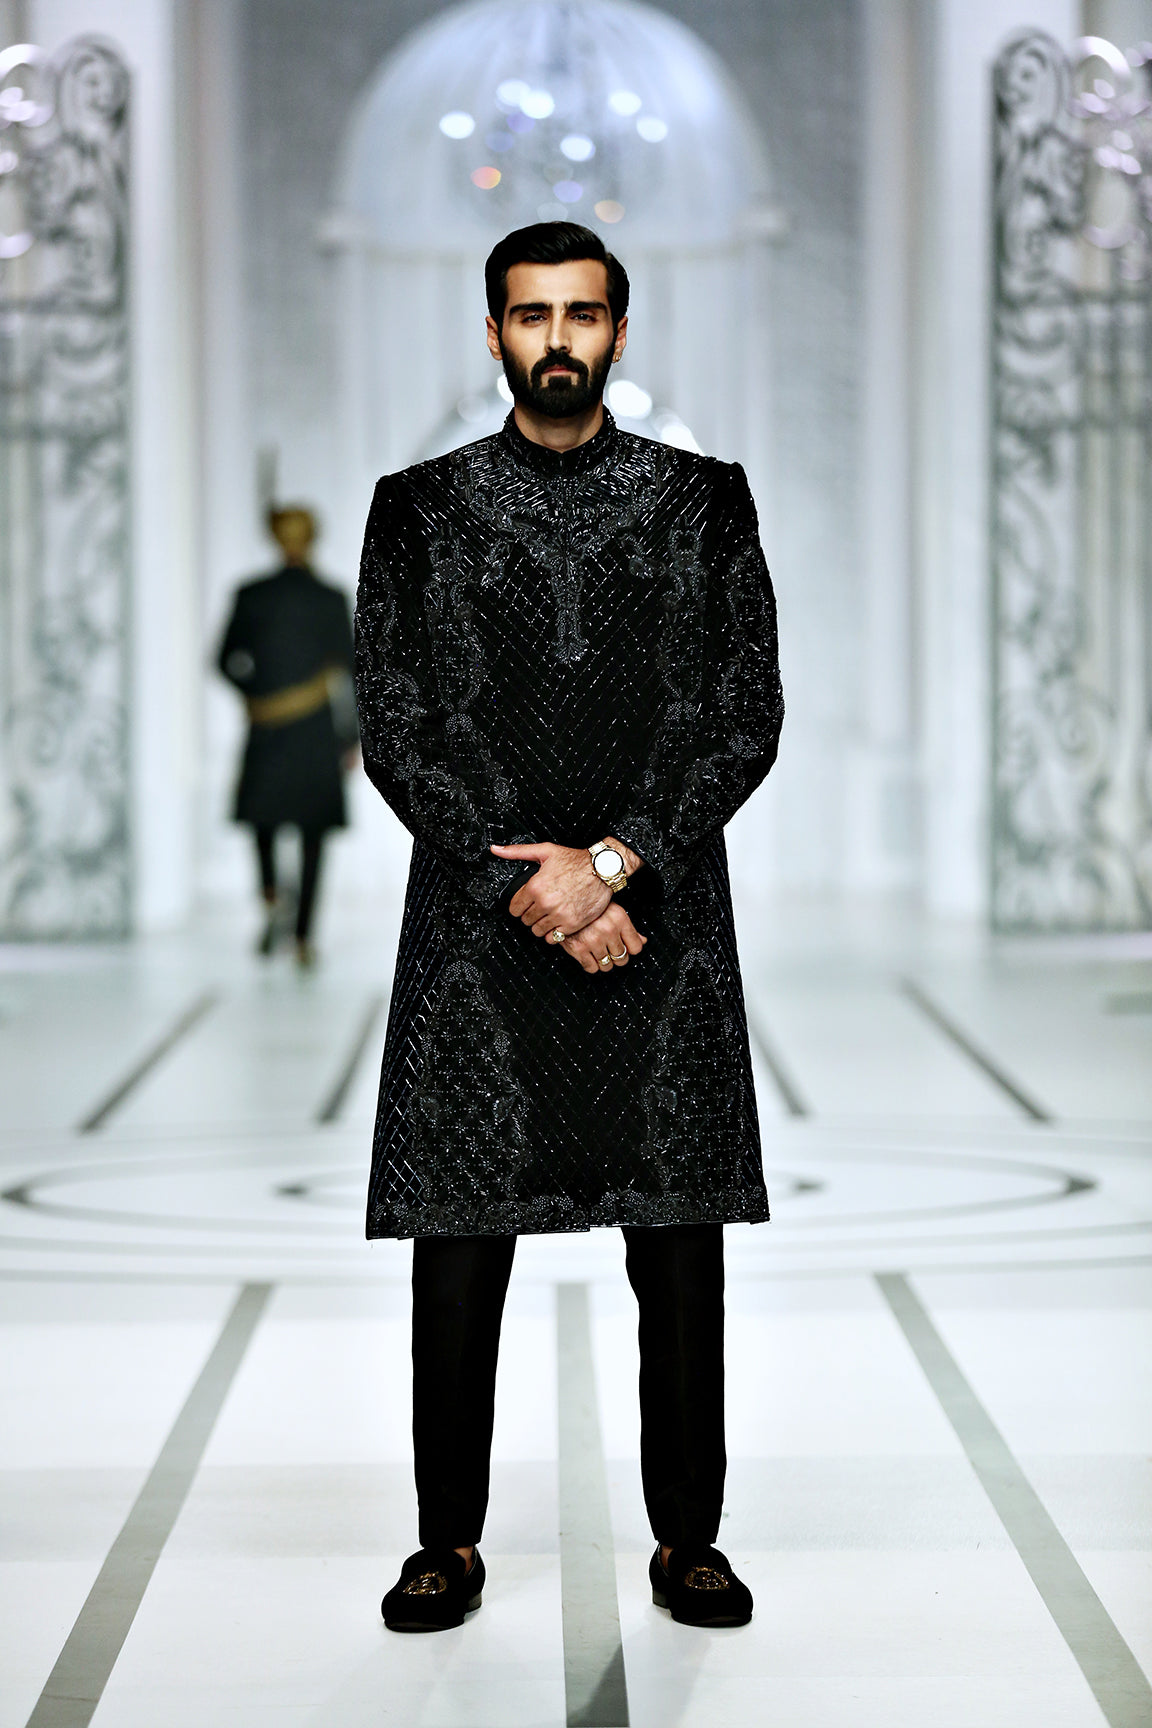 BCW 41 Lehri Black Solitaire Sherwani - Hand-Worked Elegance for a Dazzling Groom